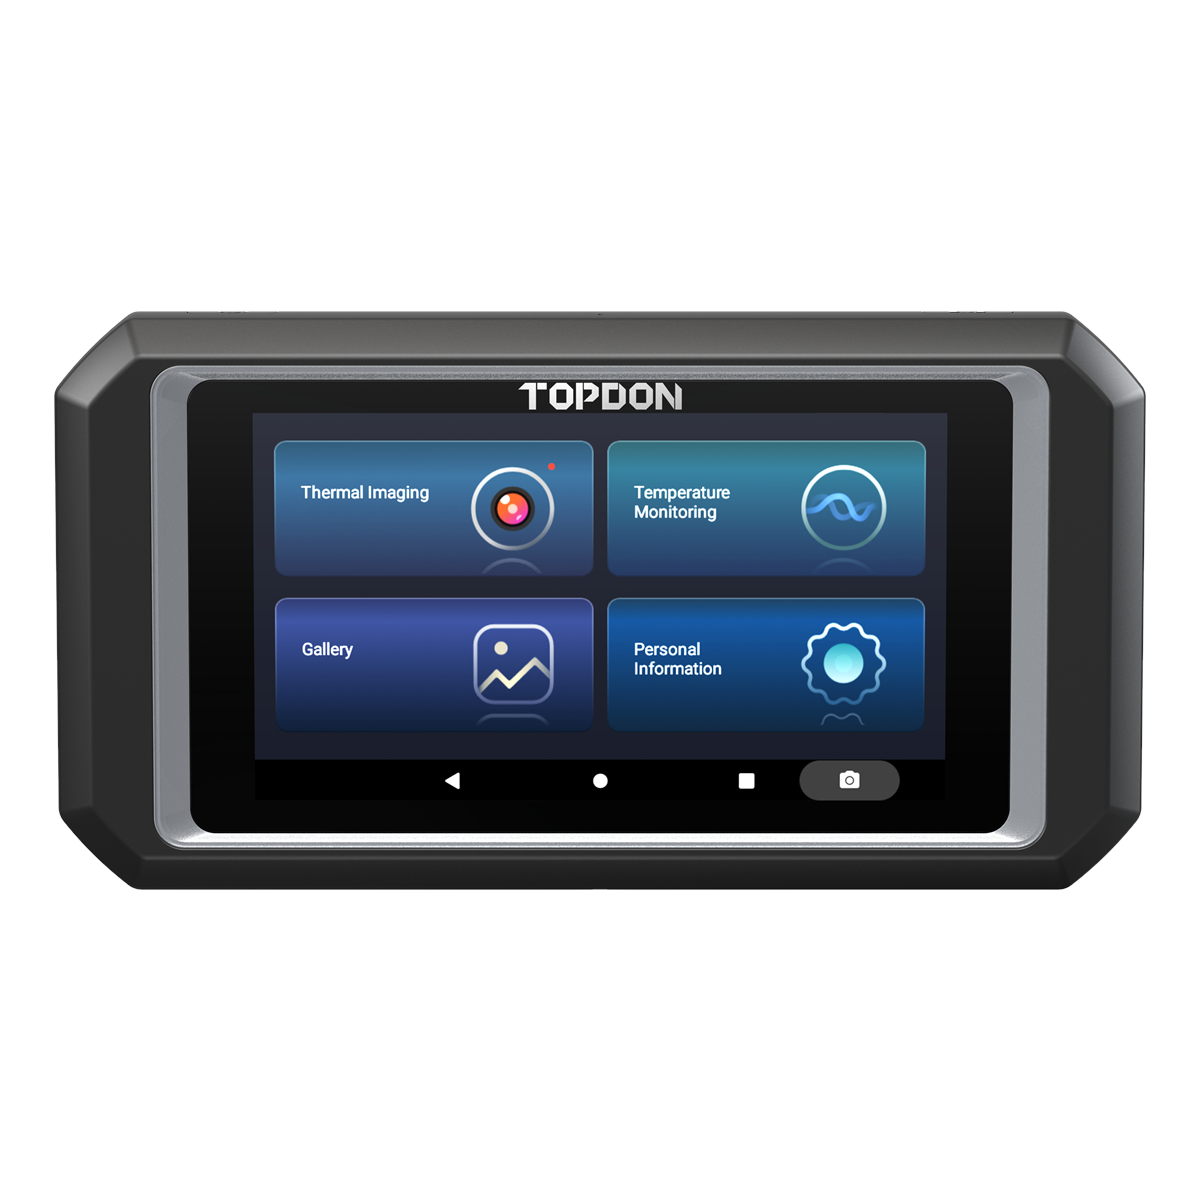 Picture of Topdon TOPTD52120004 TC003 Thermal Imager Camera